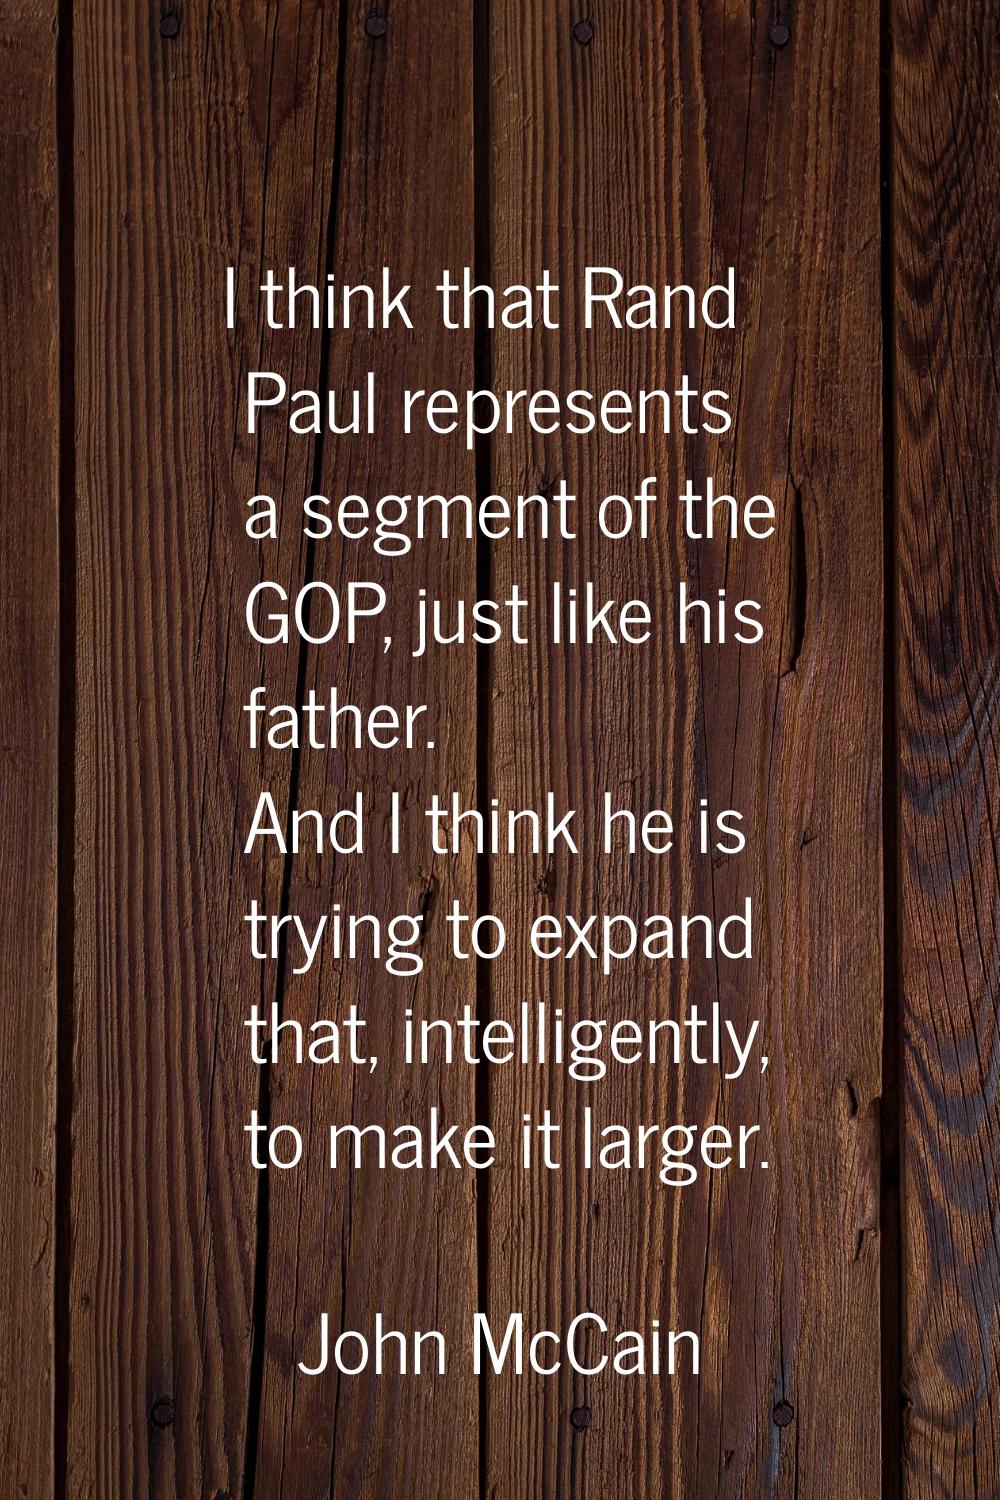 I think that Rand Paul represents a segment of the GOP, just like his father. And I think he is try